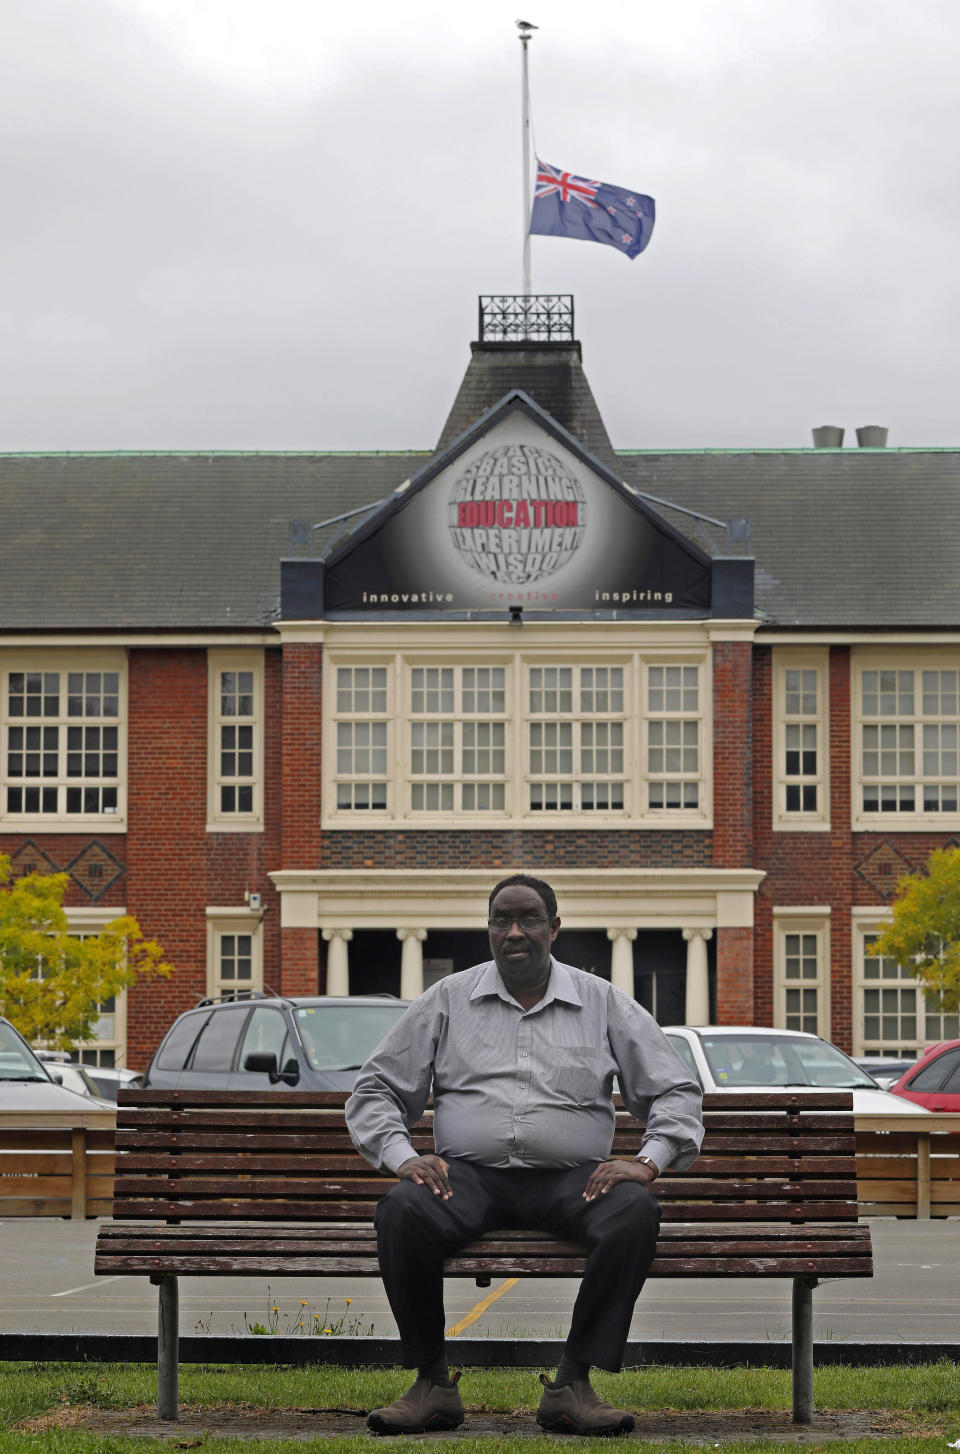 Ahmed Tani poses a portrait in front of Hagley College in Christchurch, New Zealand, Sunday, March 17, 2019. Tani settled in Christchurch after fleeing civil war in Somalia. The New Zealand city seemed a place of peace. It was more than just physically distant from the strife he had known. With its leafy streets, vibrant gardens and green public parks, the Garden City was even visually a world away from his war-scorched past. But that peace hasn't always lasted and now the city will need to use its experience rebuilding from a 2011 earthquake to recover from the nation's worst terrorist attack.(AP Photo/Vincent Yu)